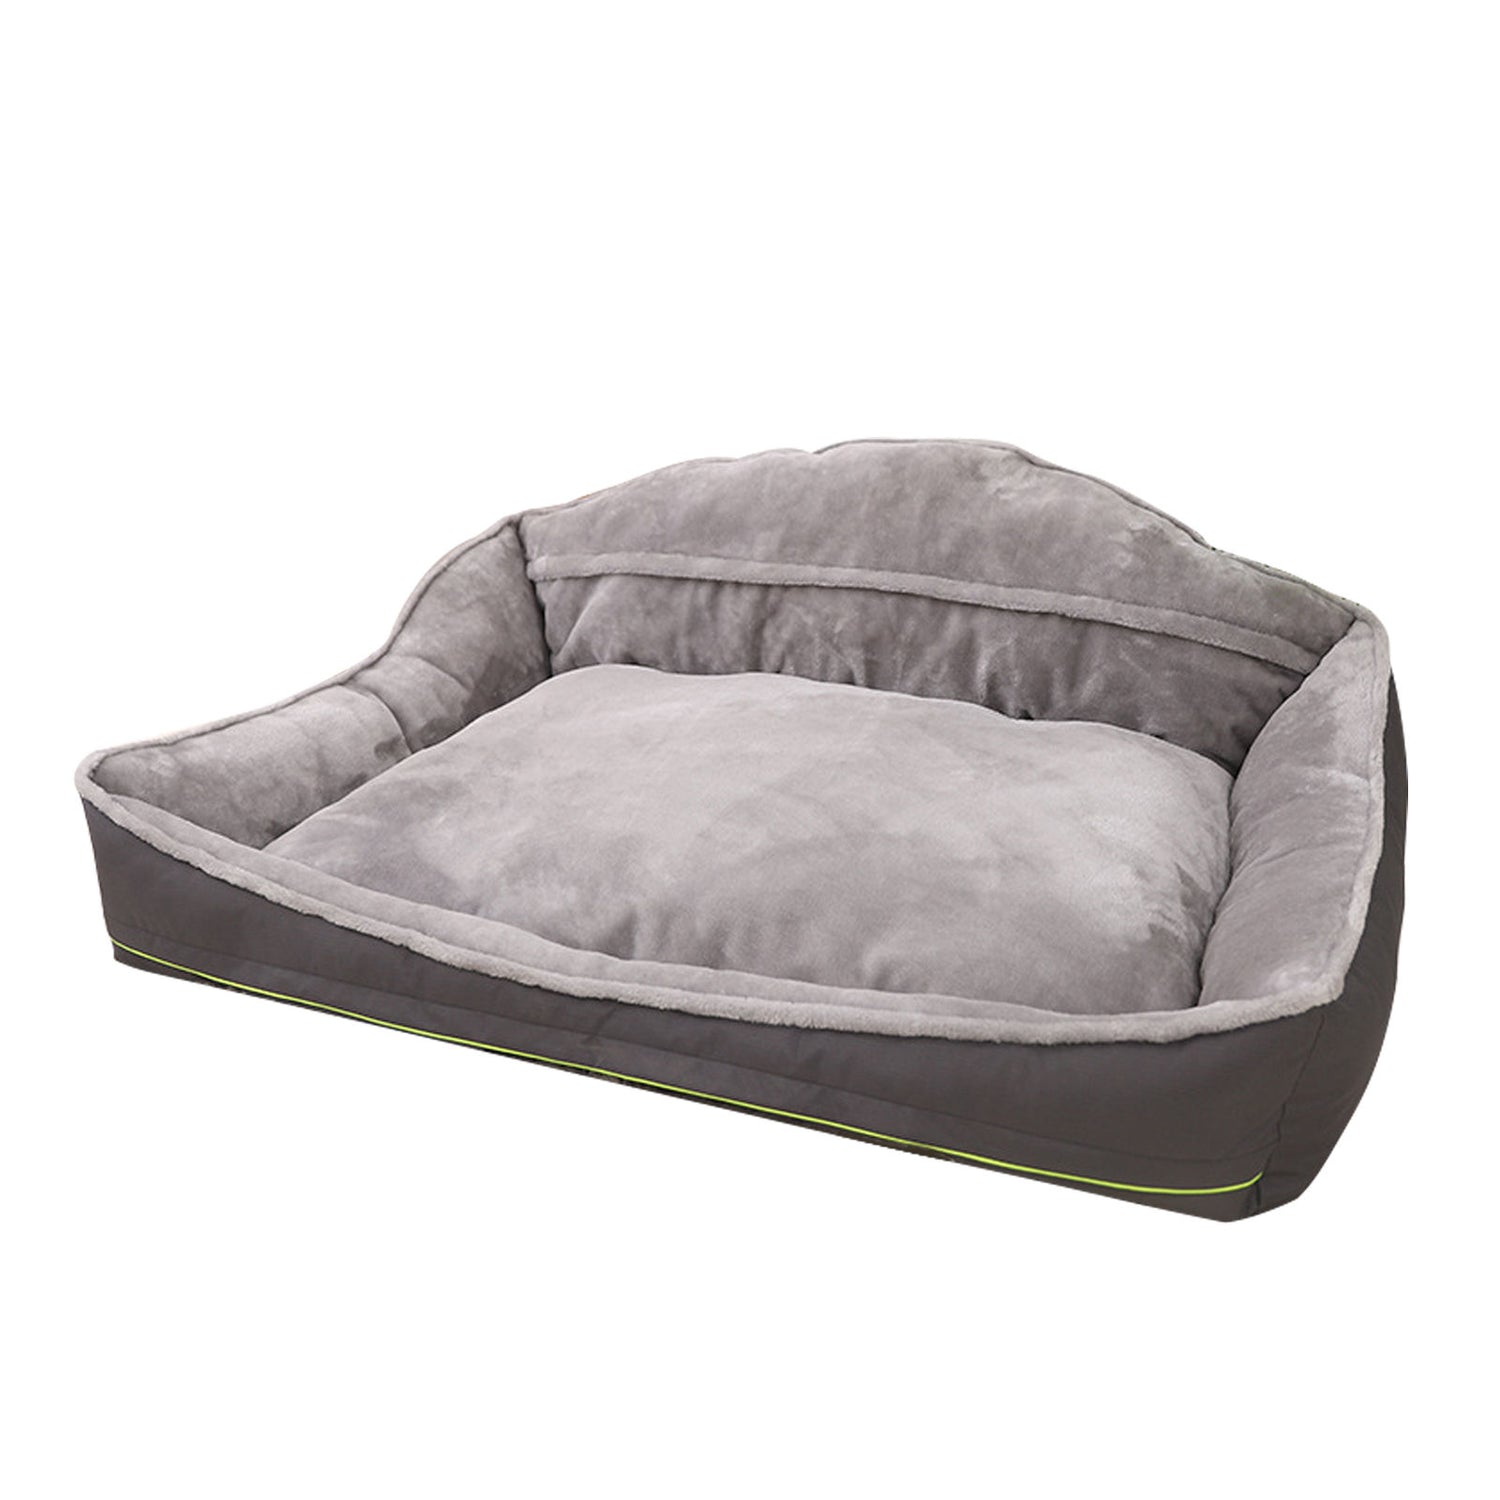 Sofa-Style Dog Bed Waterproof Washable Soft High Back Comfy Sleeping Kennel L-Pet Beds-PEROZ Accessories